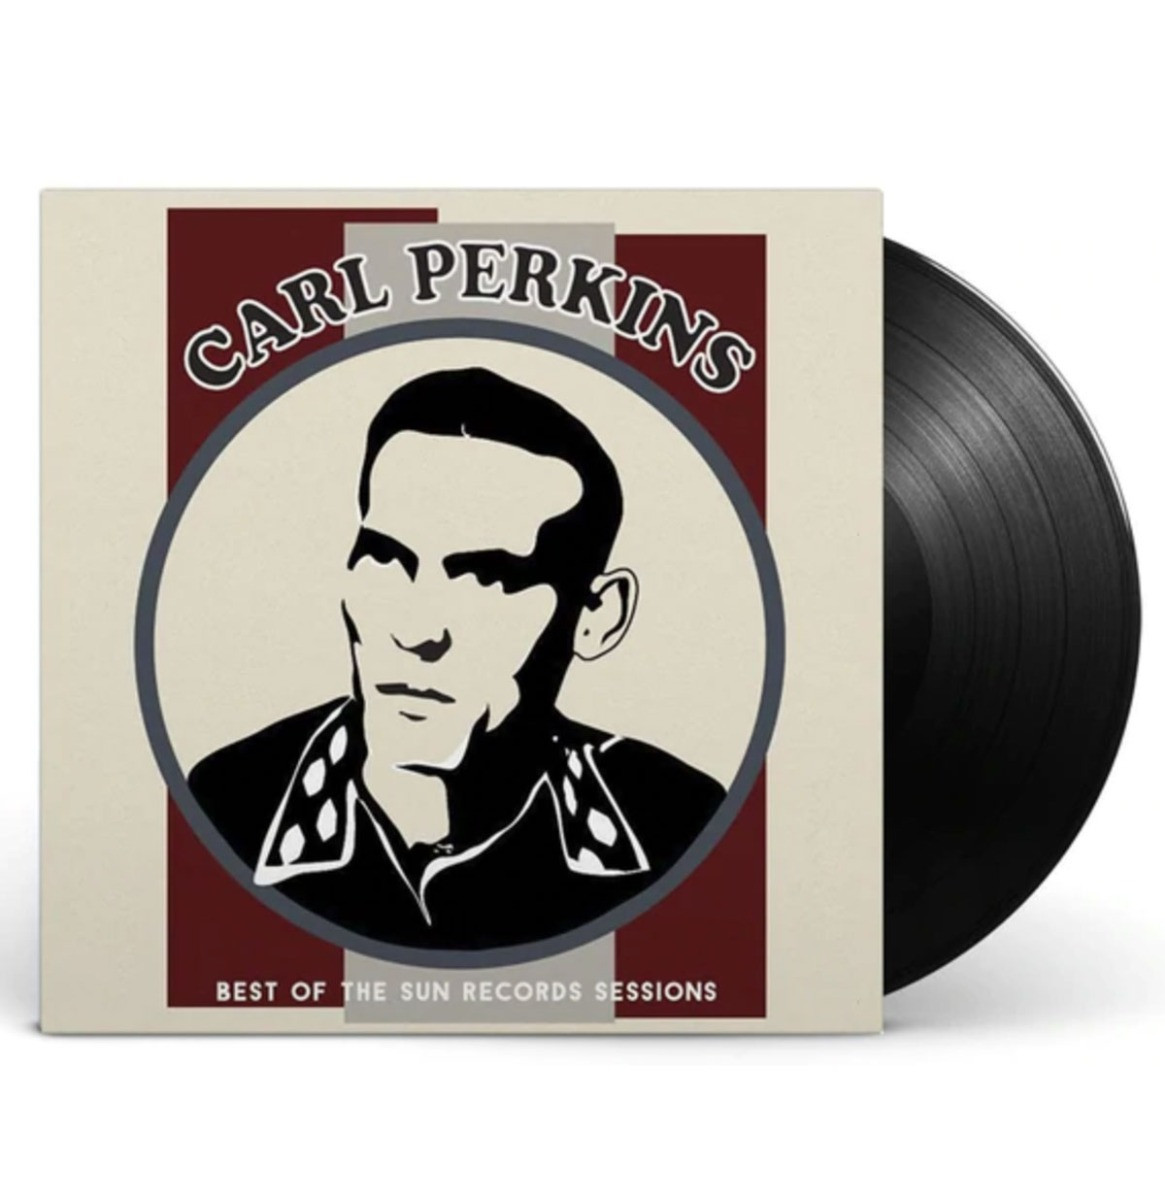 Carl Perkins - Best Of The Sun Records Sessions LP